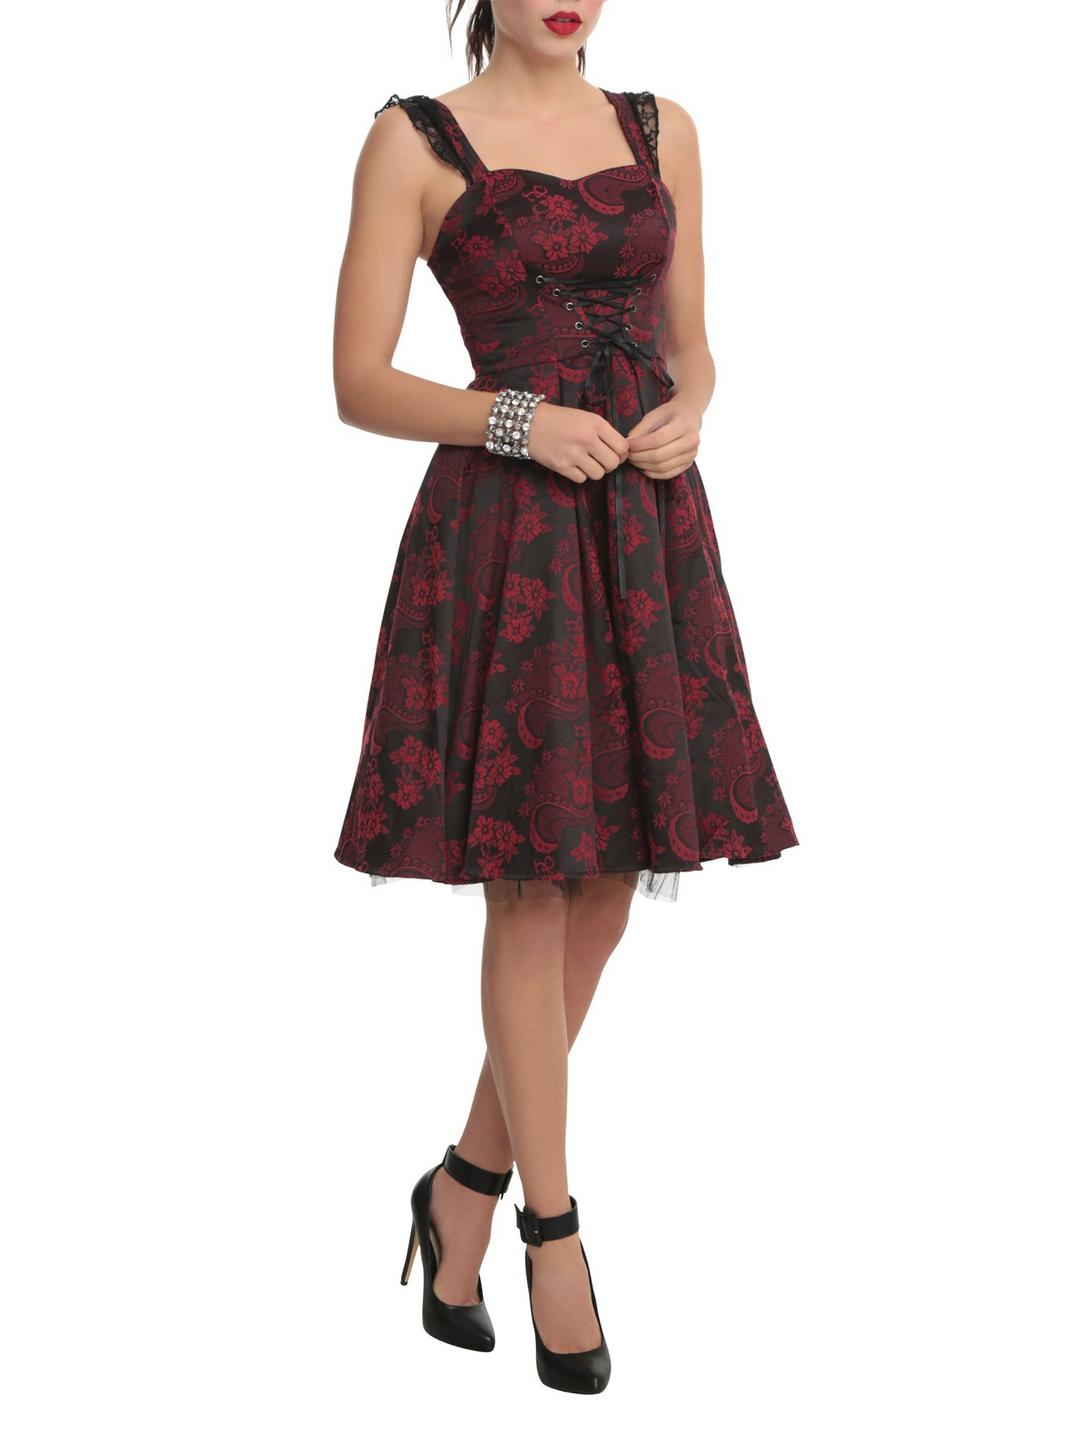 Red and Black Brocade Lace Up Dress ...